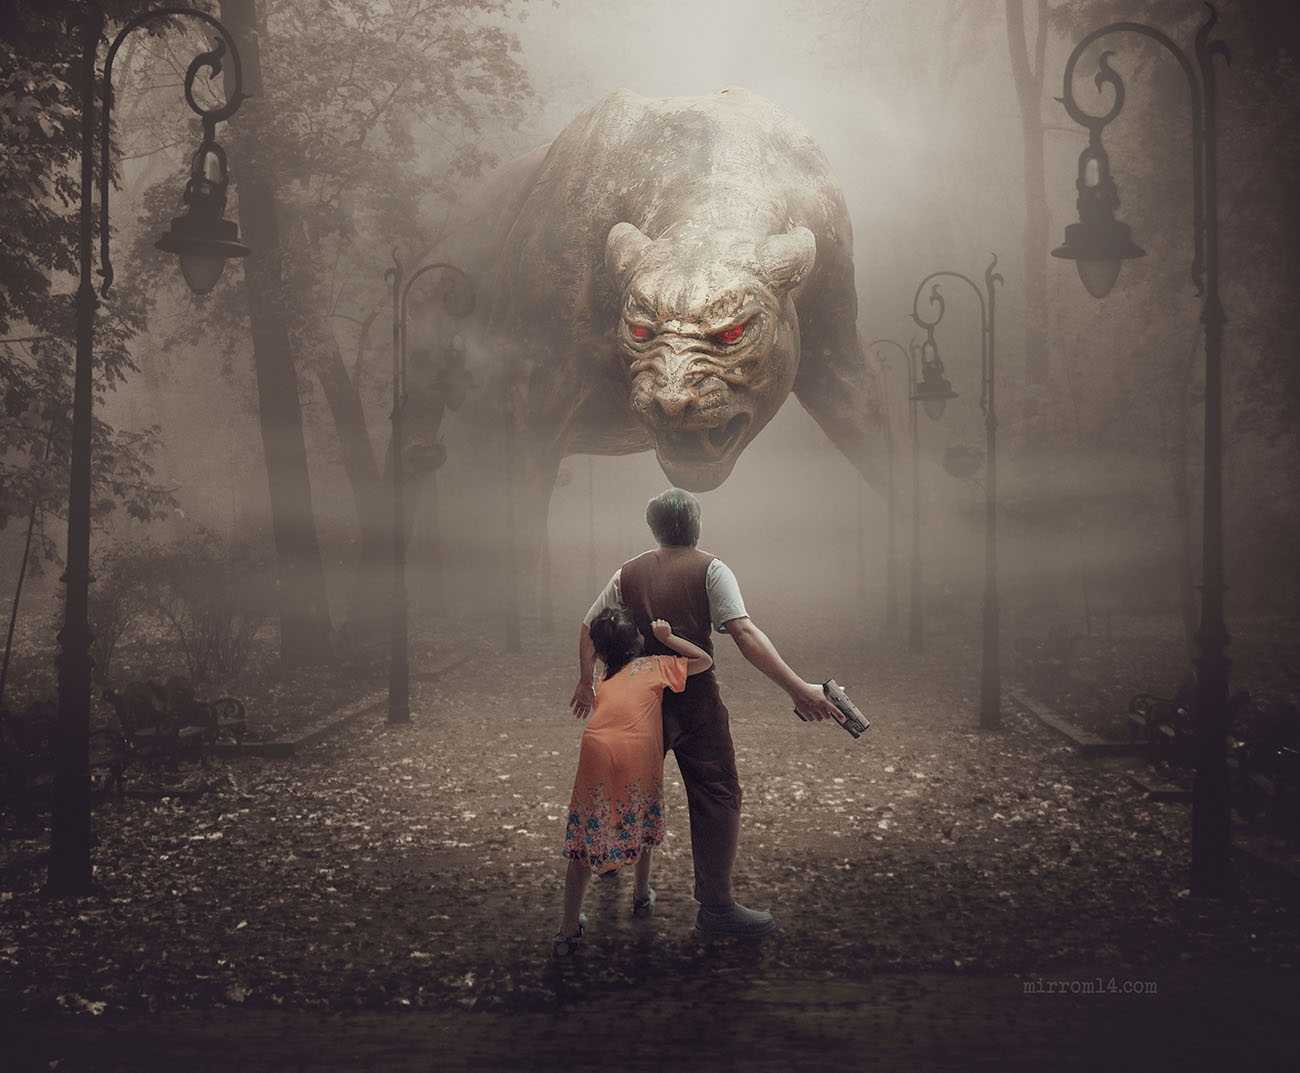 Create a Big Cat Demon Photo Manipulation With Vintage Color in Photoshop